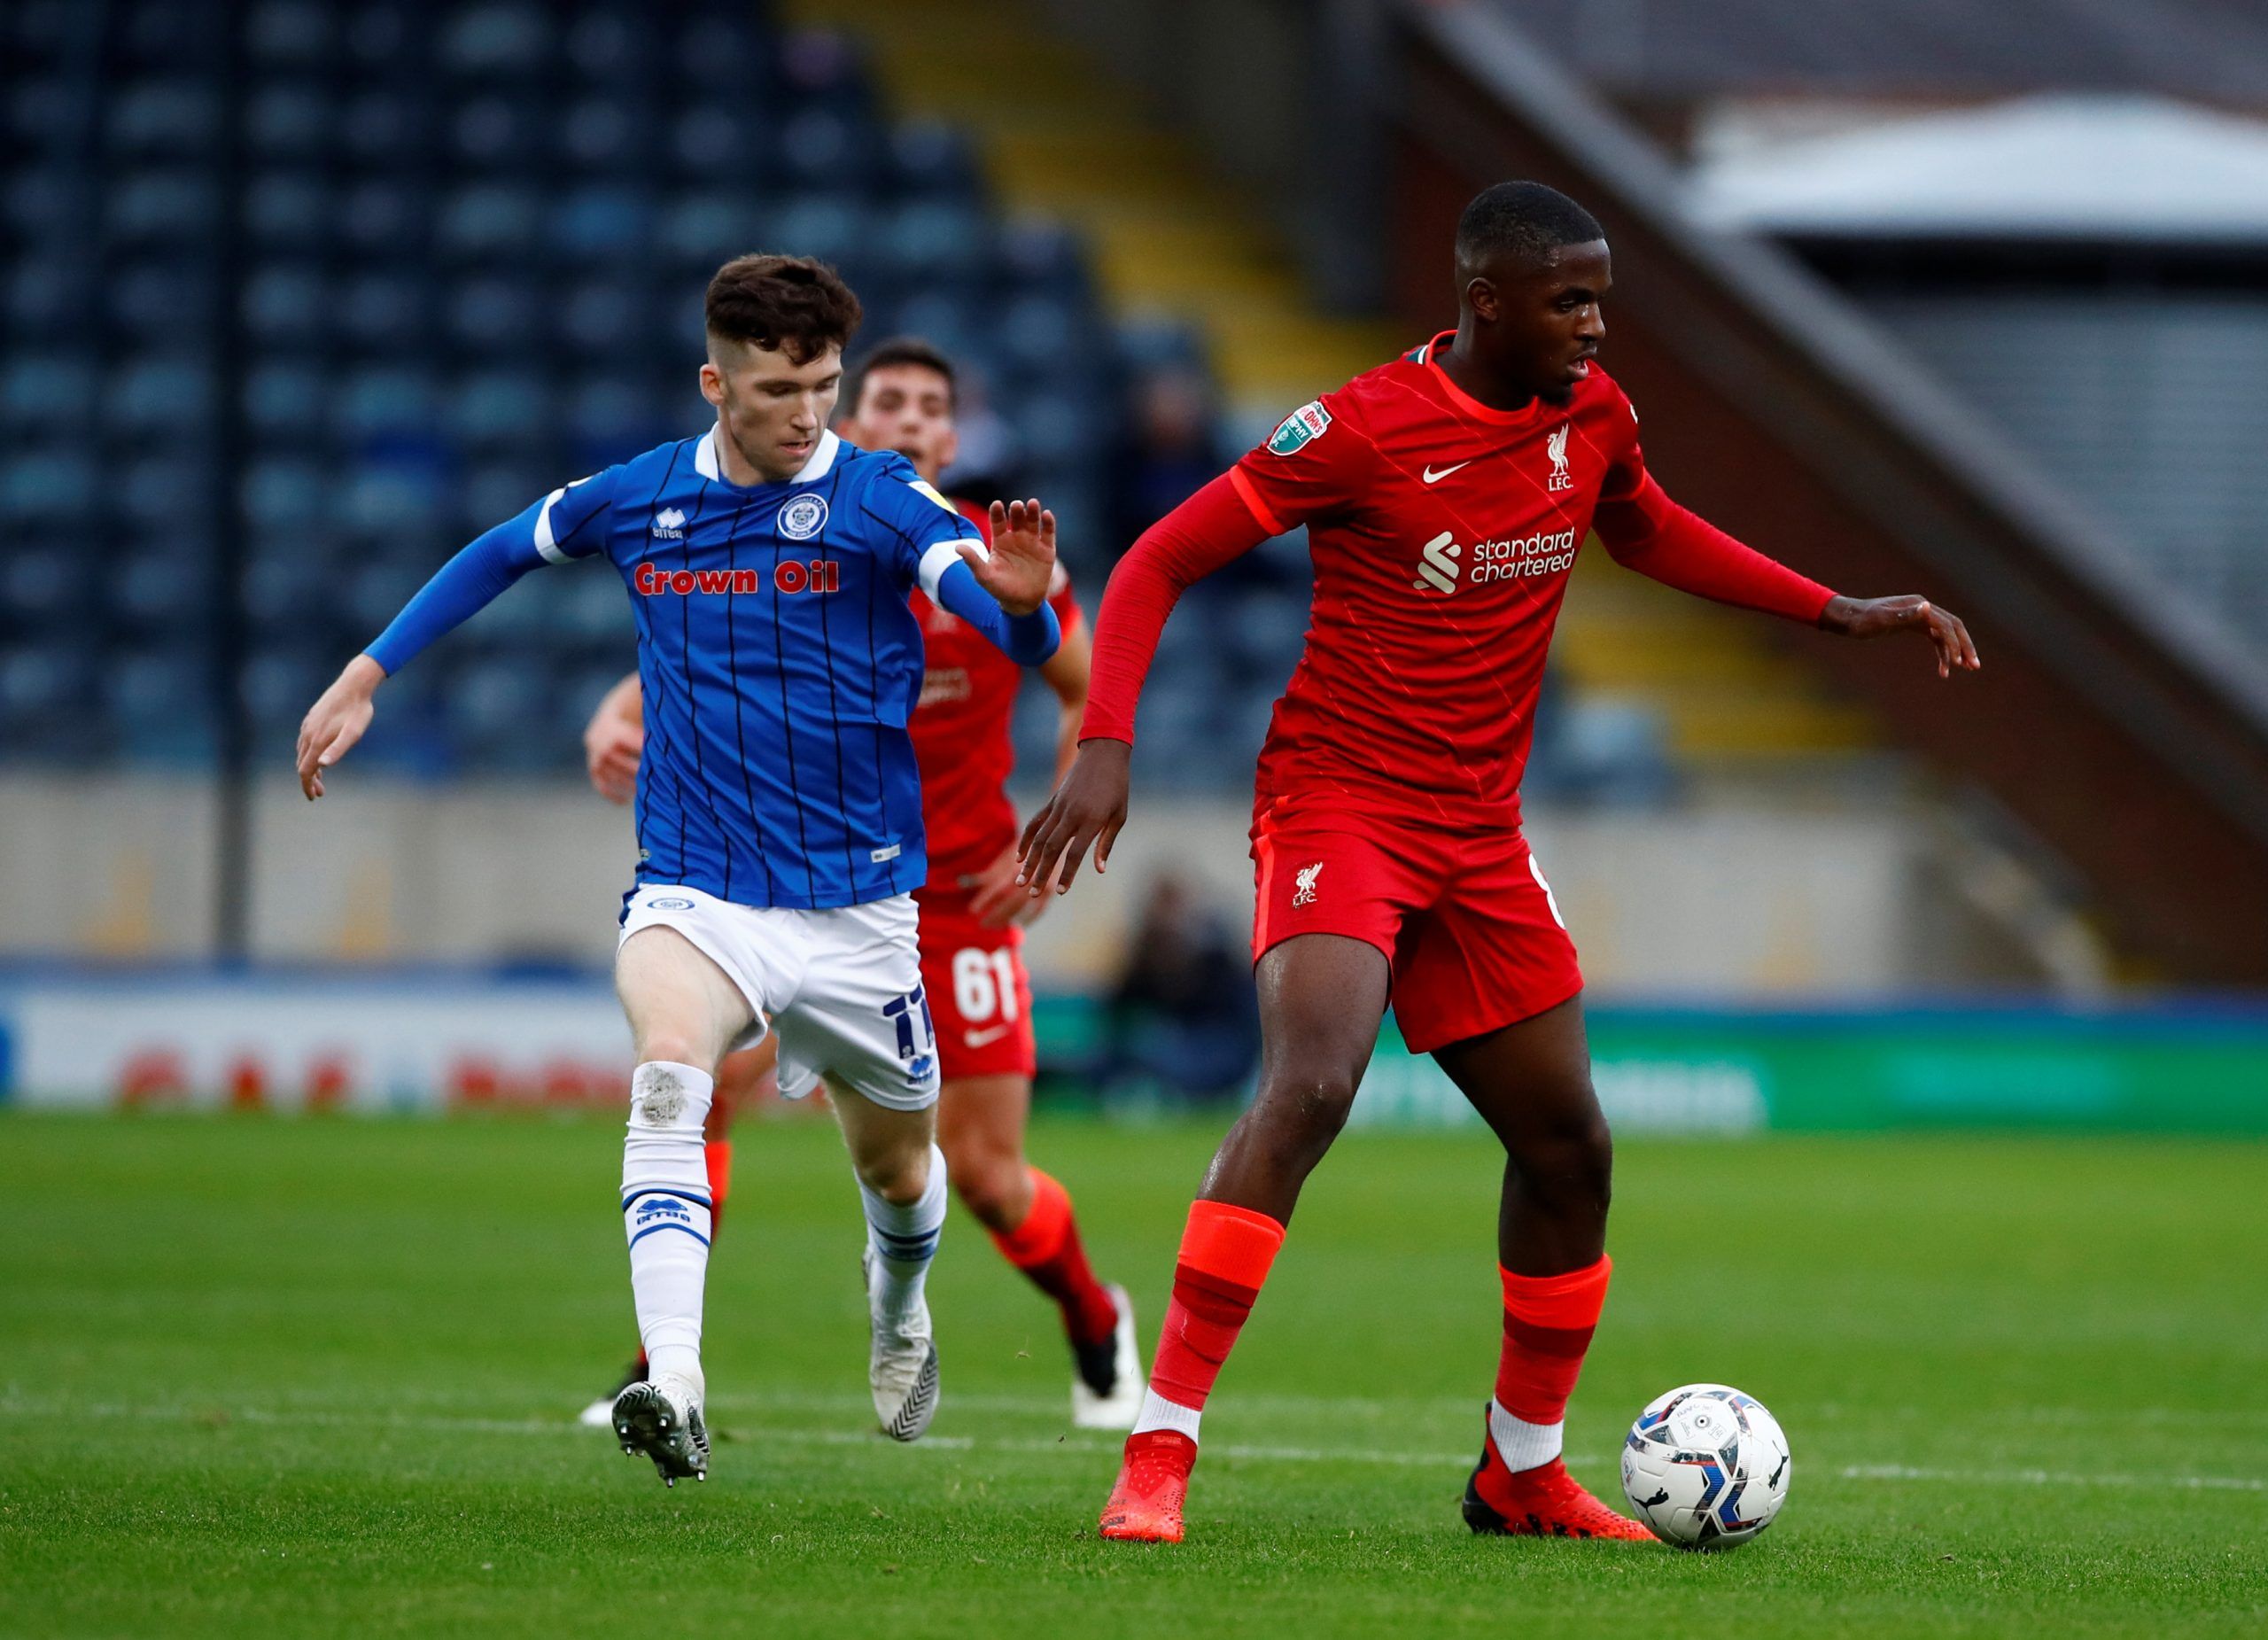 Soccer Football - EFL Trophy - Group Stage - Northern Group D - Rochdale v Liverpool U21 - Spotland Stadium, Rochdale, Britain - August 31, 2021   Liverpool's Billy Koumetio in action with Rochdale's Conor Grant   Action Images/Jason Cairnduff    EDITORIAL USE ONLY. No use with unauthorized audio, video, data, fixture lists, club/league logos or 